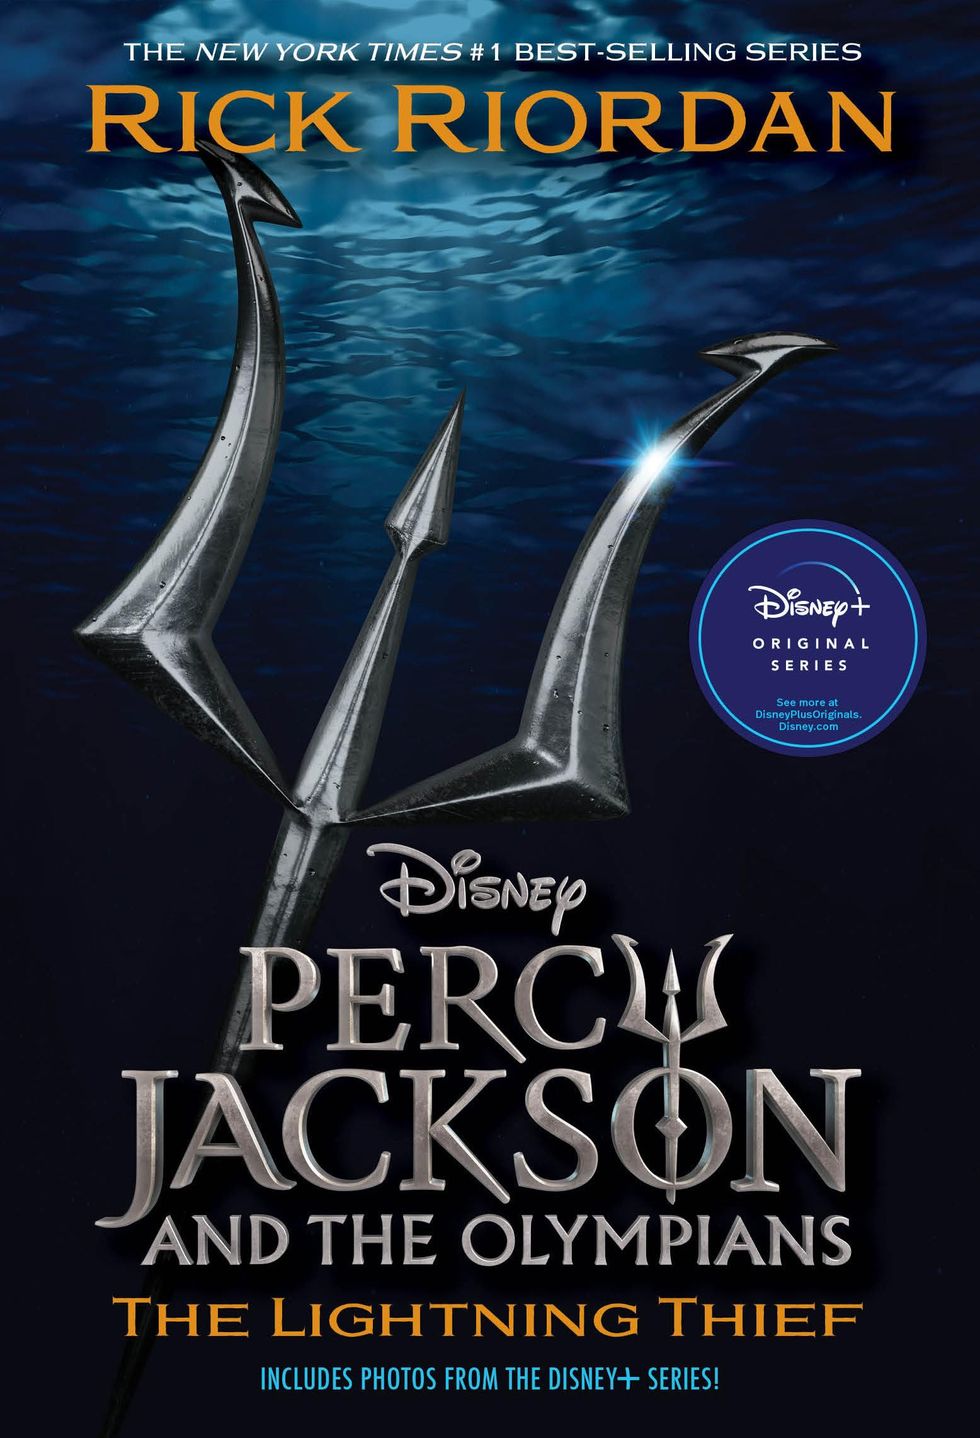 Percy Jackson and the Olympians, Ebook 1: Lightning Thief Disney+ Tie in Edition (Percy Jackson & the Olympians)